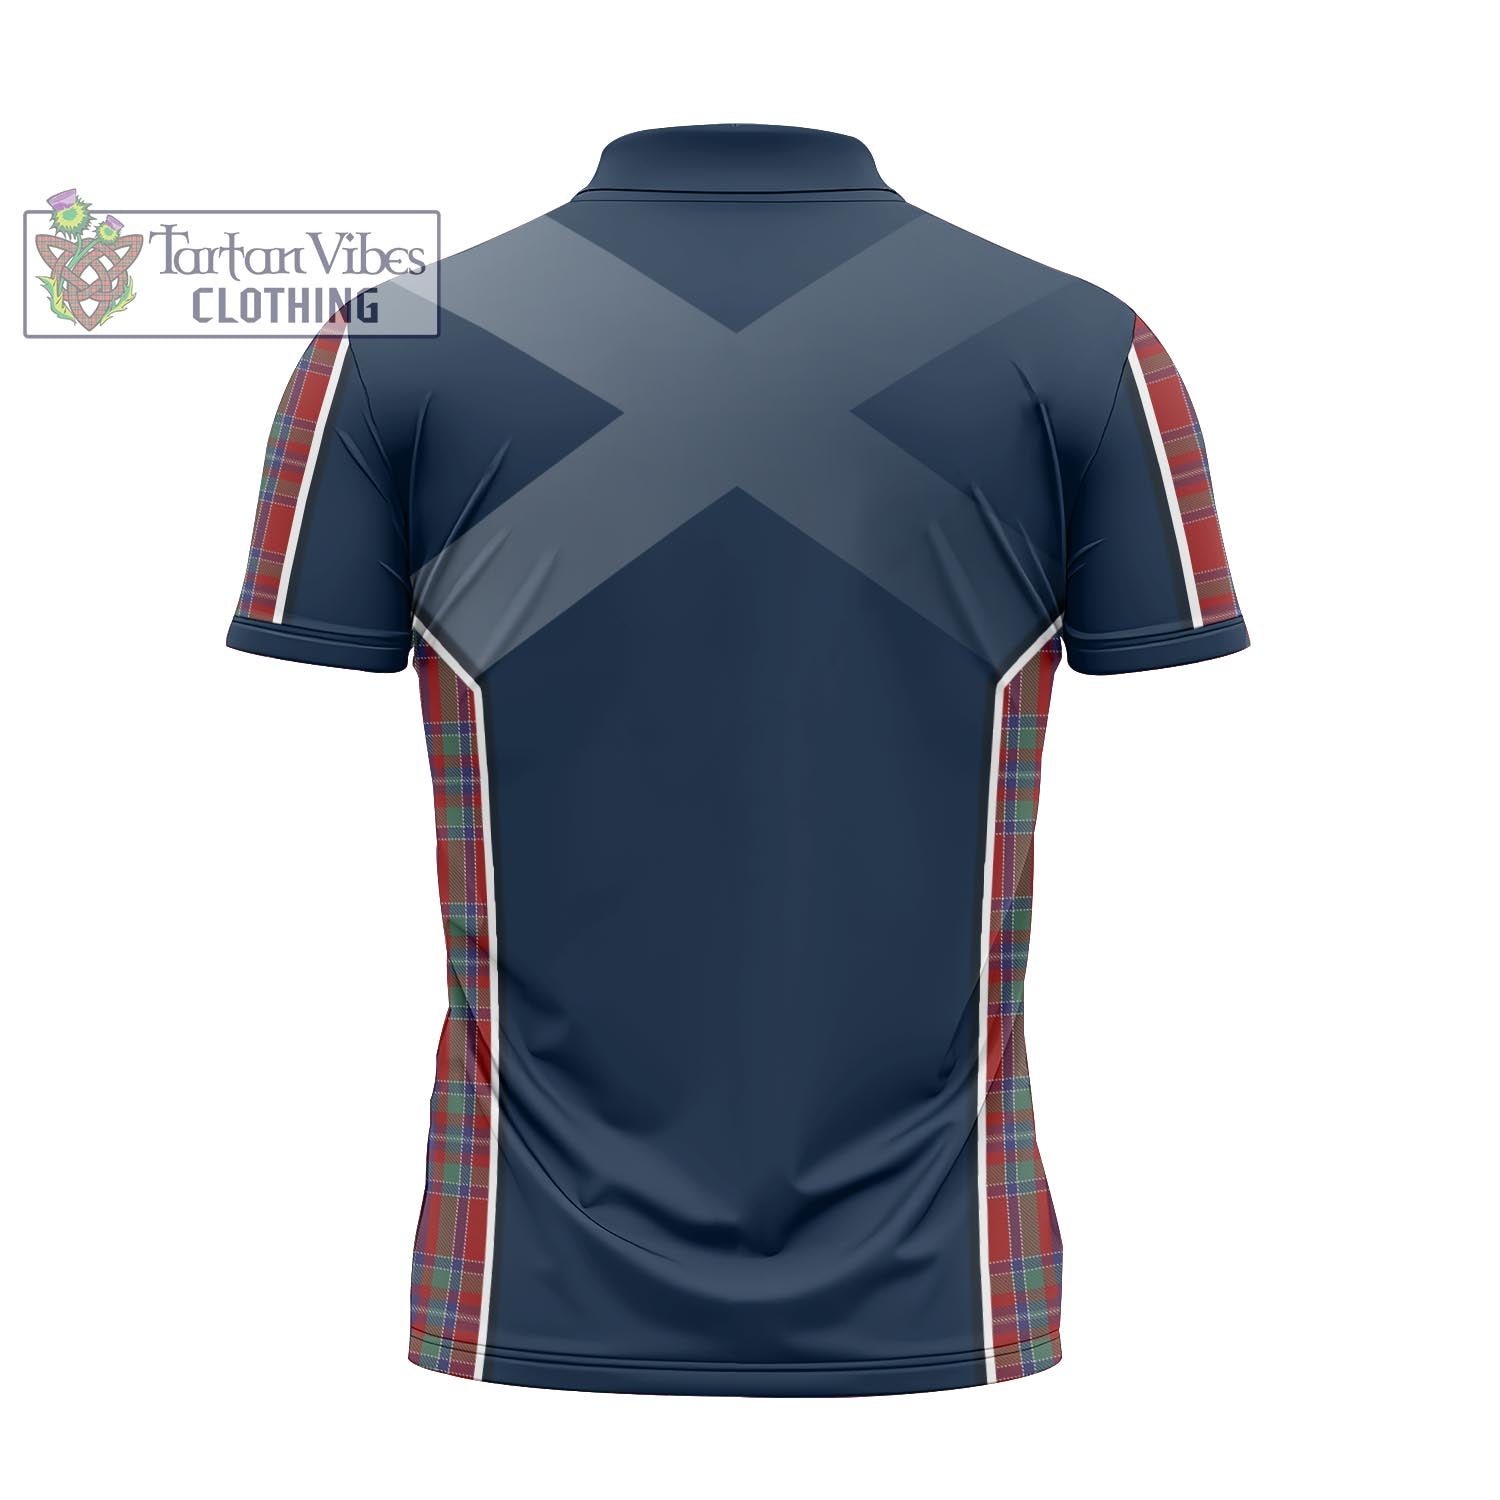 Tartan Vibes Clothing Spens Tartan Zipper Polo Shirt with Family Crest and Scottish Thistle Vibes Sport Style